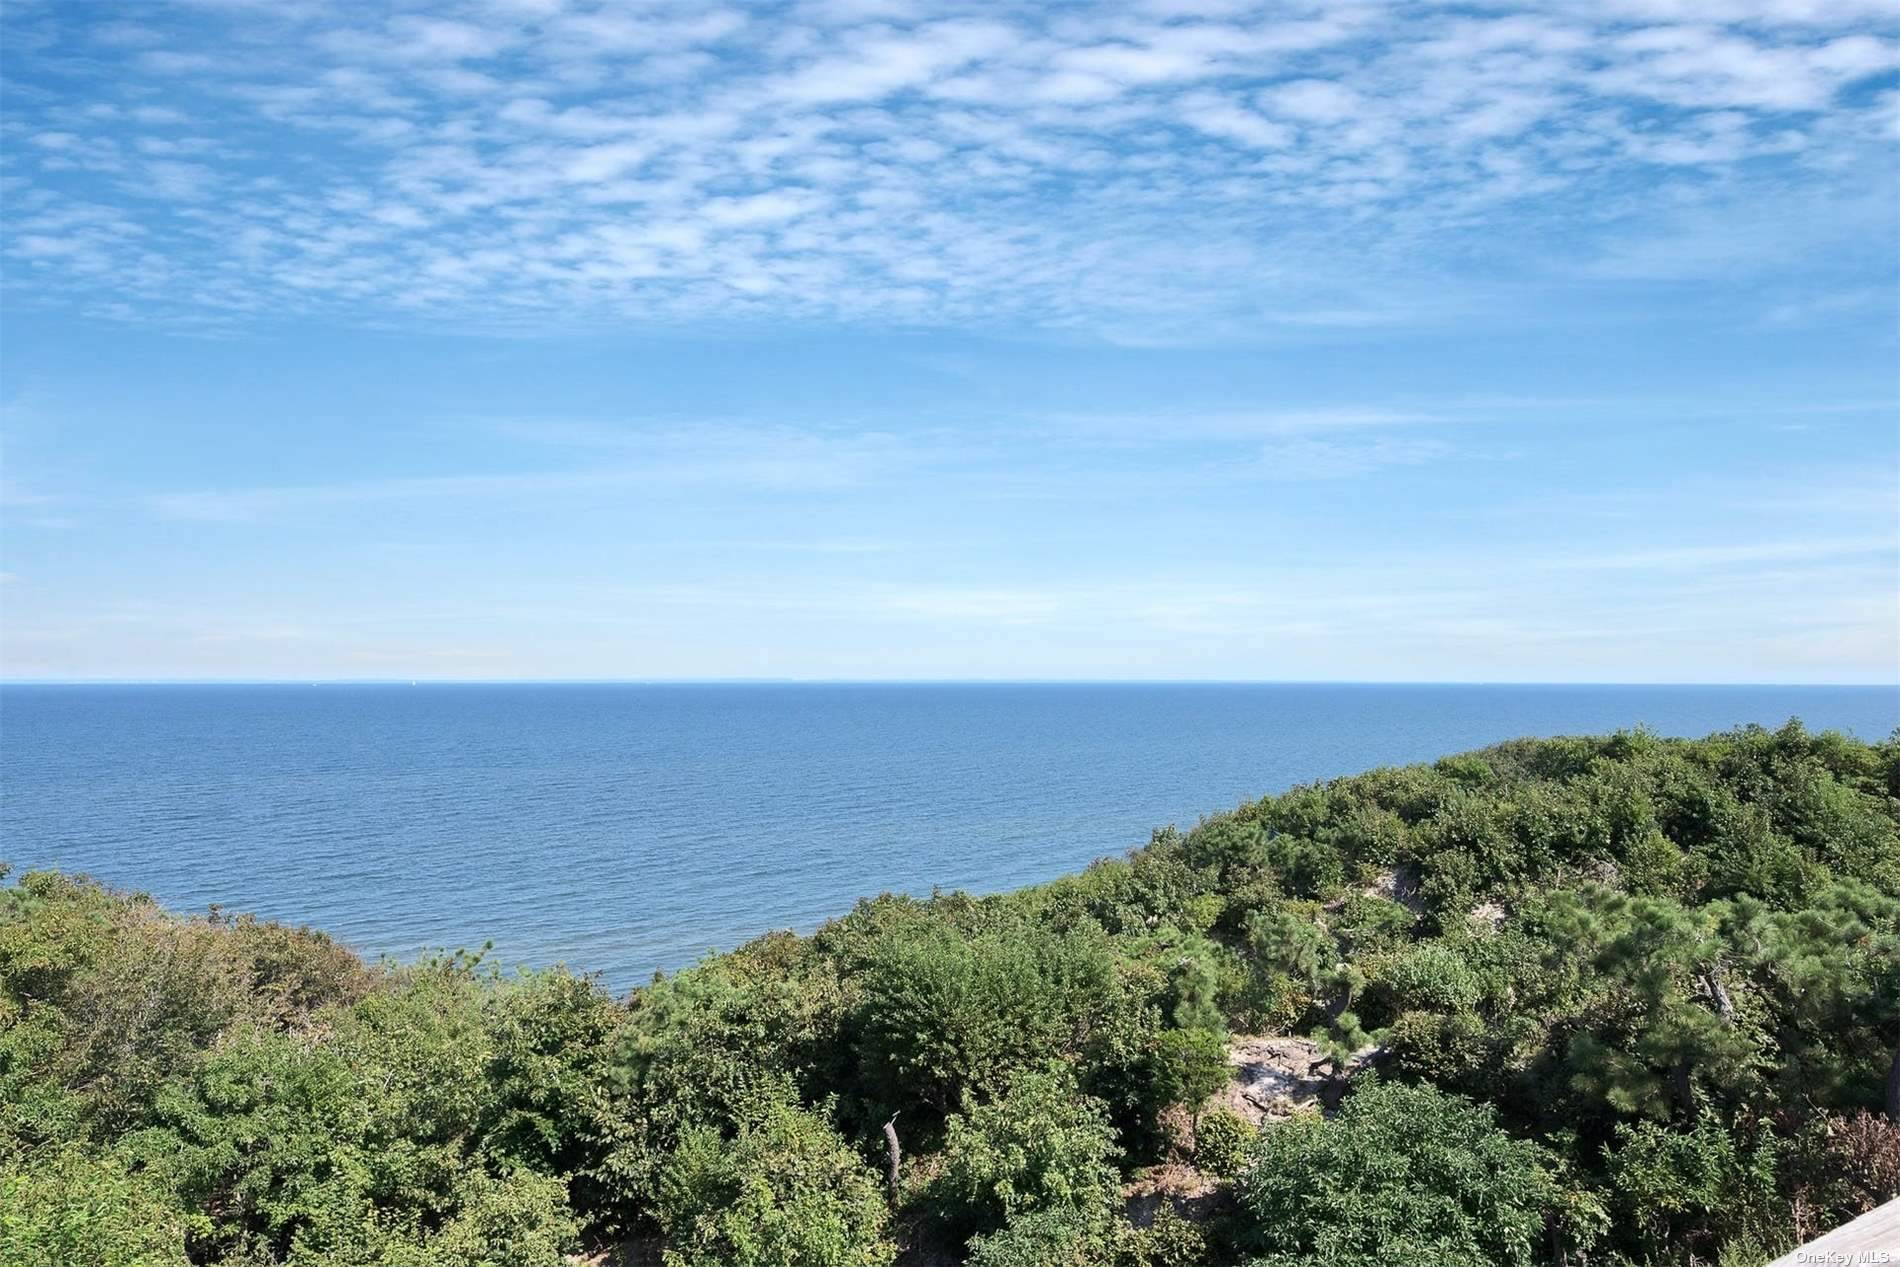 Amazing sunsets and unobstructed views of the Long Island Sound are yours from this spacious 2 Bedroom 2 bath condo at the Knolls of Fox Hill.